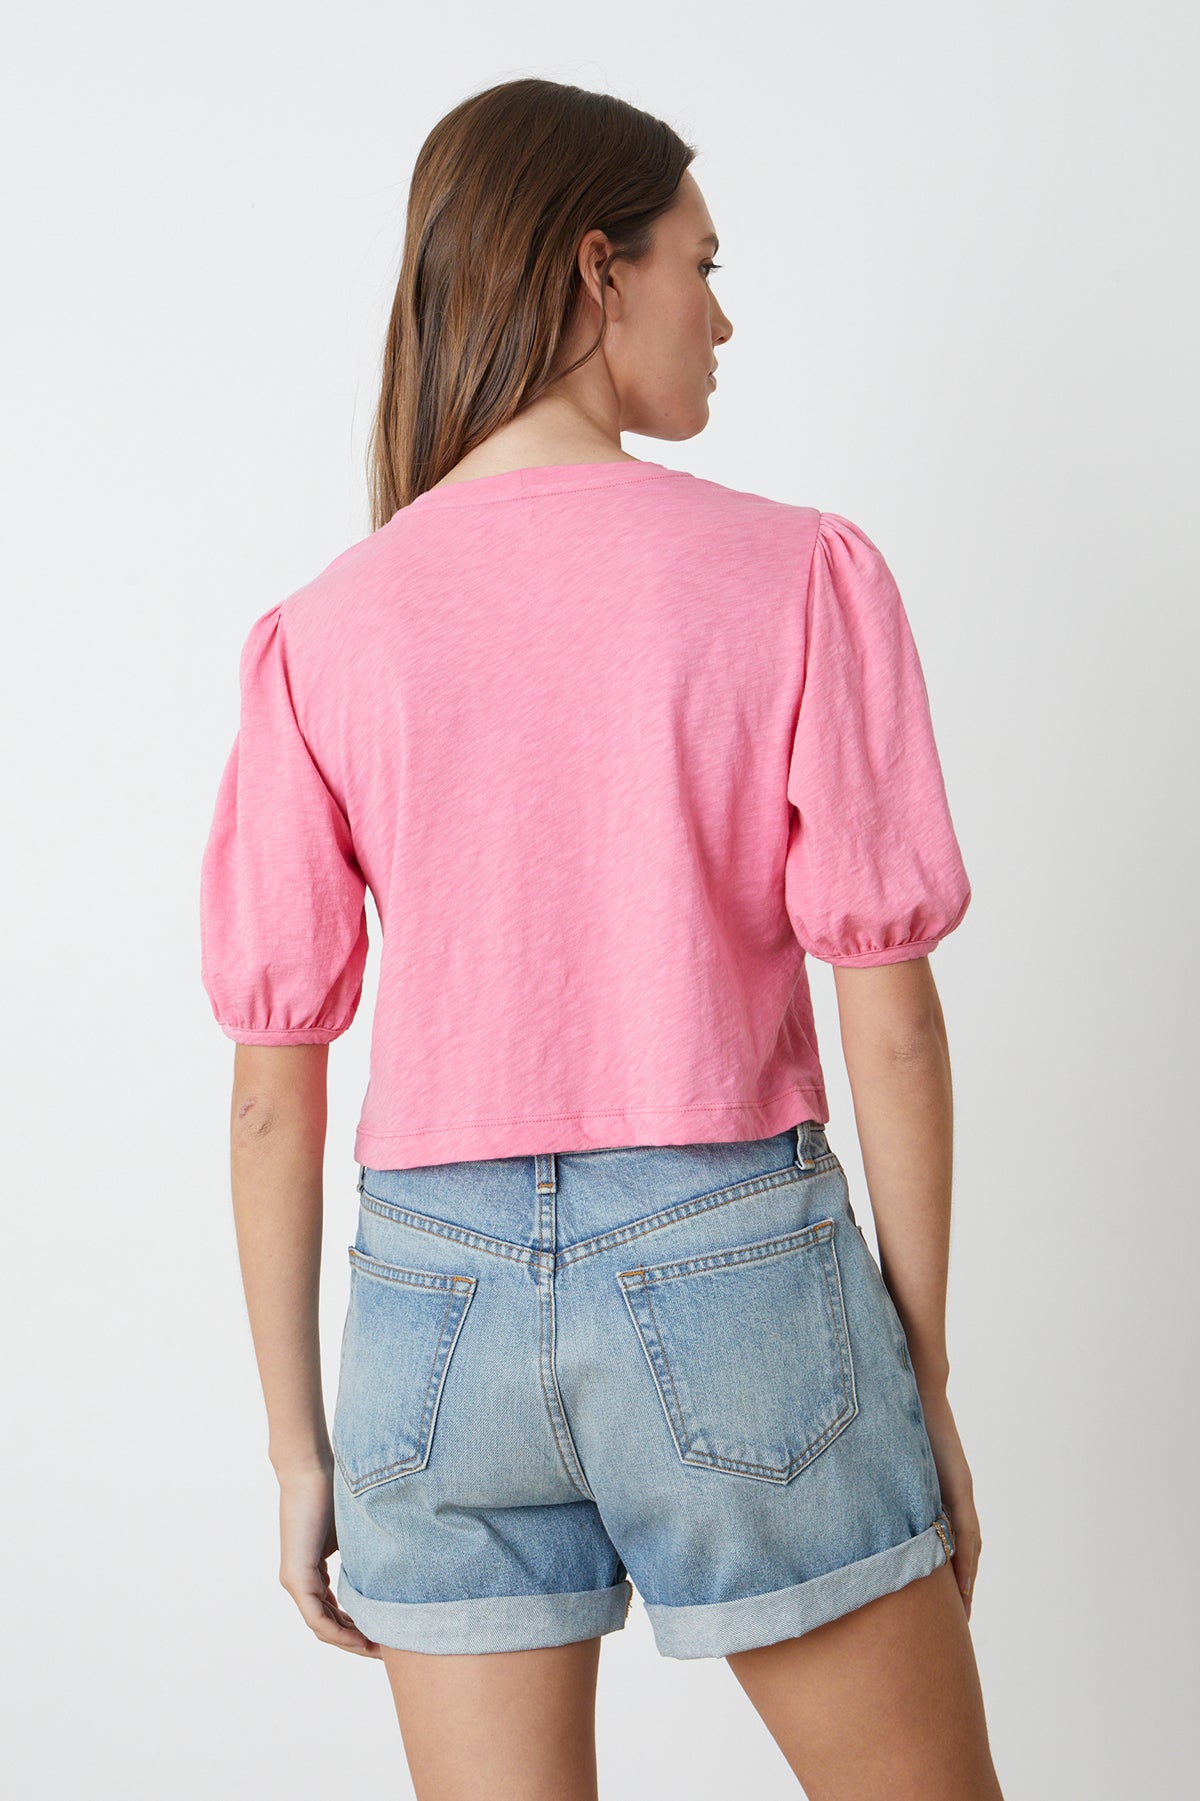 the back view of a woman wearing a Velvet by Graham & Spencer HILARY PUFF SLEEVE CROPPED TEE and denim shorts.-26342696747201